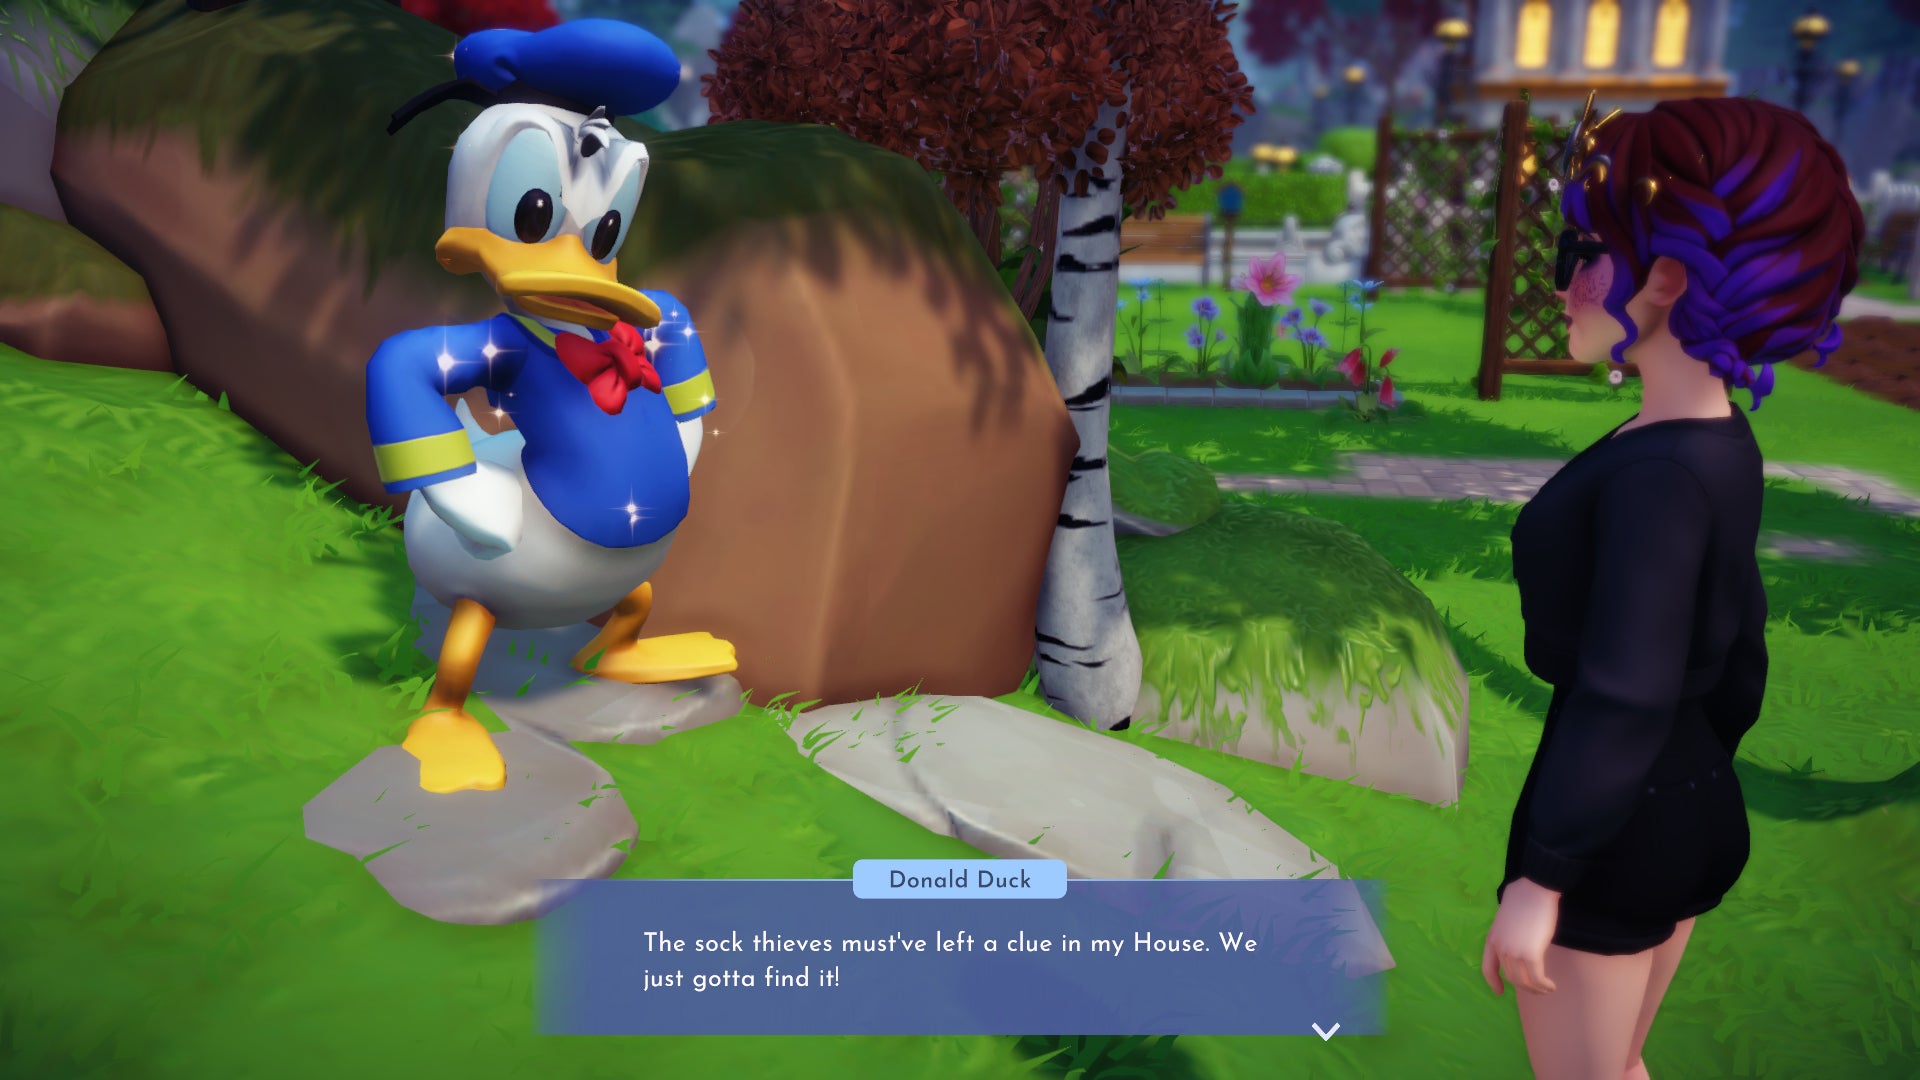 The player speaks to Donald Duck in Disney Dreamlight Valley